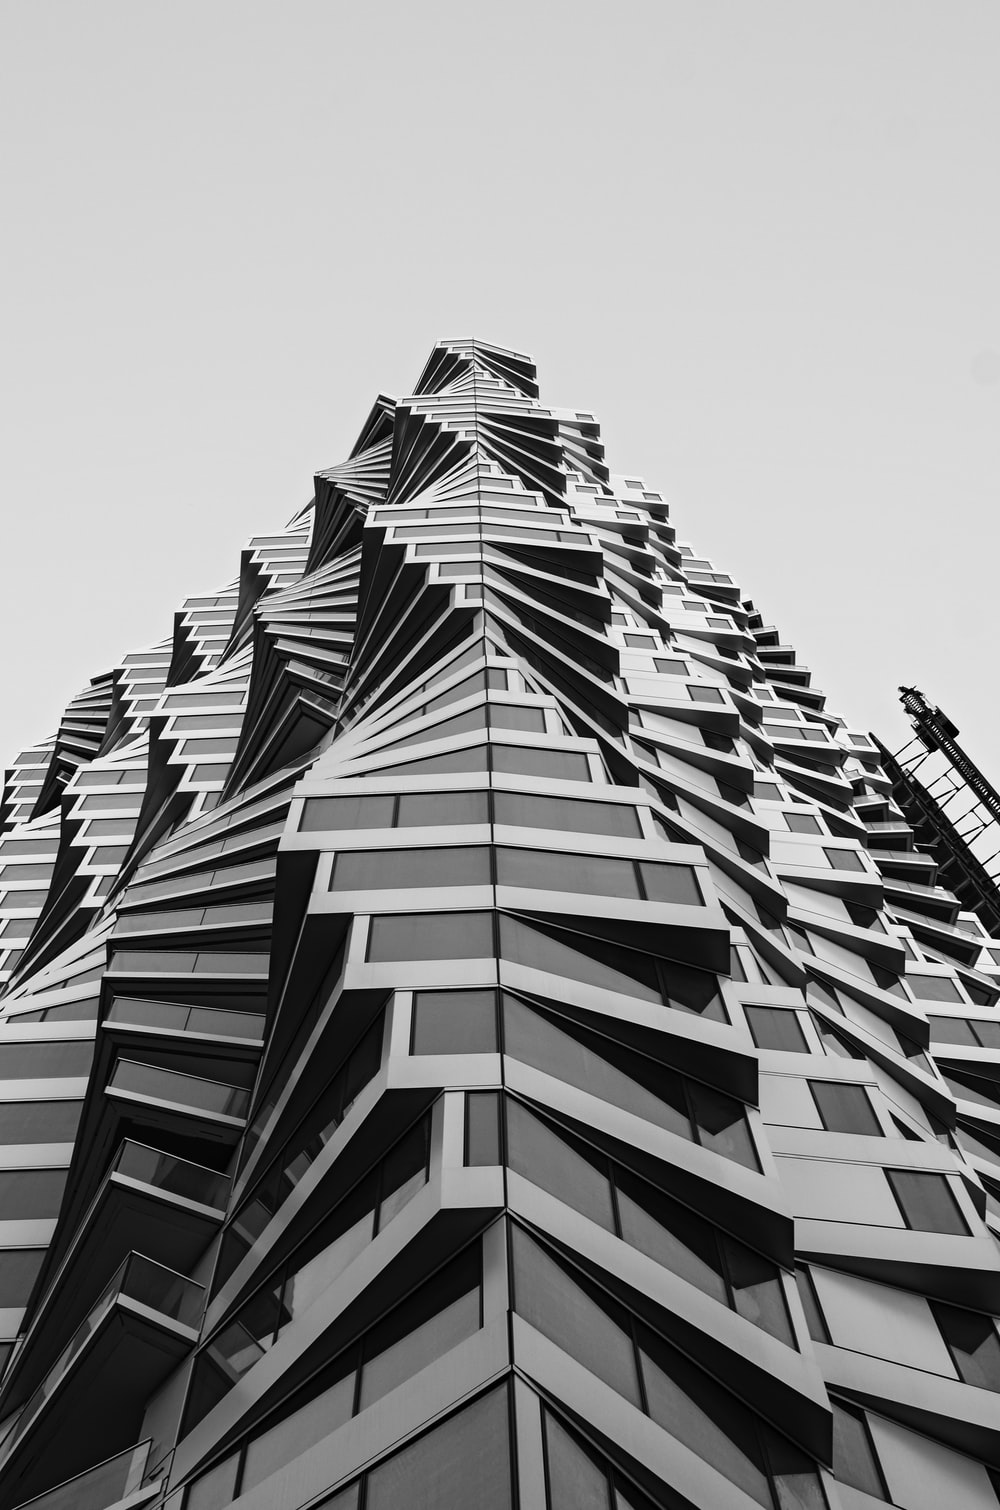 Grayscale Photography Of High Rise Building During Daytime Photo